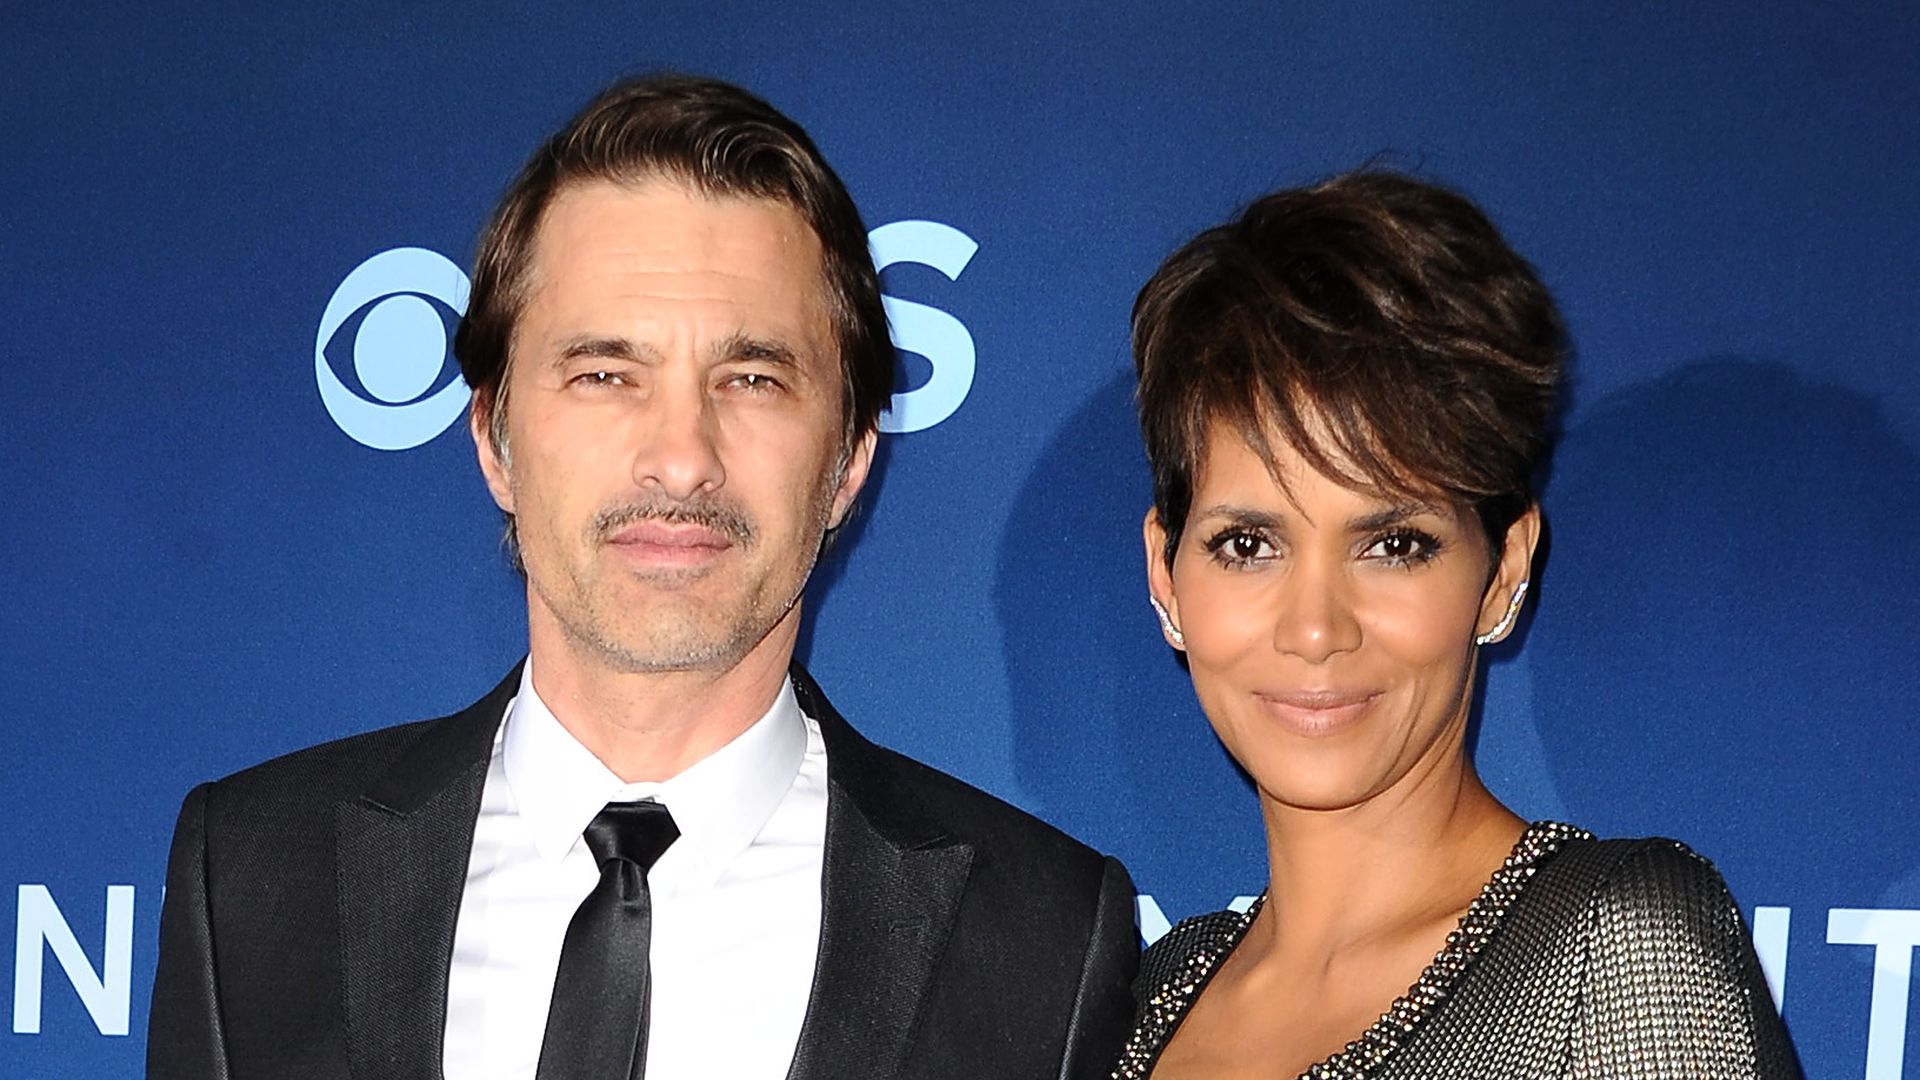 Olivier Martinez and Halle Berry attend the premiere of "Extant" on June 16, 2014 in Los Angeles